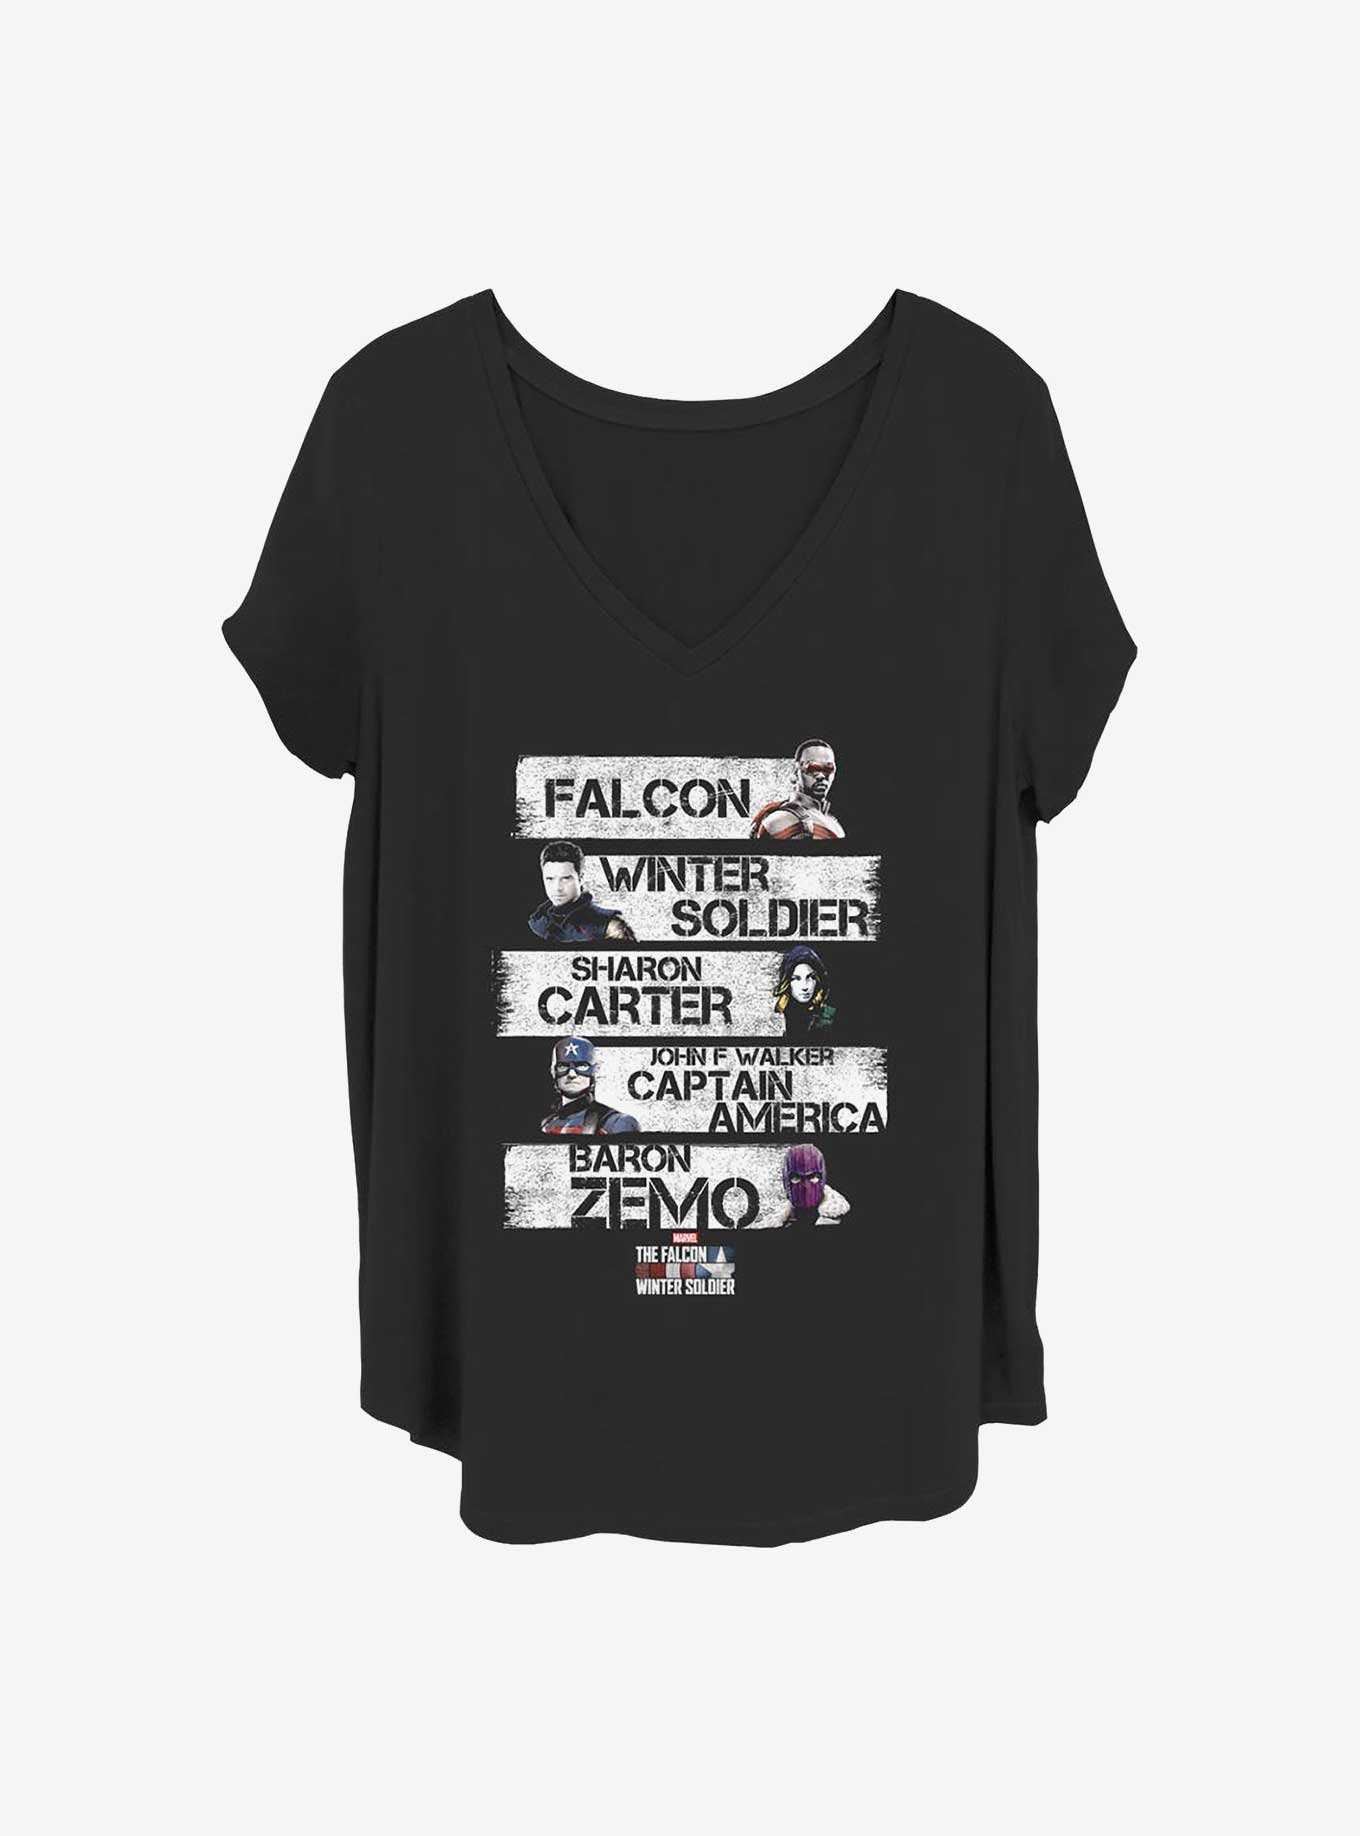 Marvel The Falcon and the Winter Soldier Character Stack Girls T-Shirt Plus Size, , hi-res